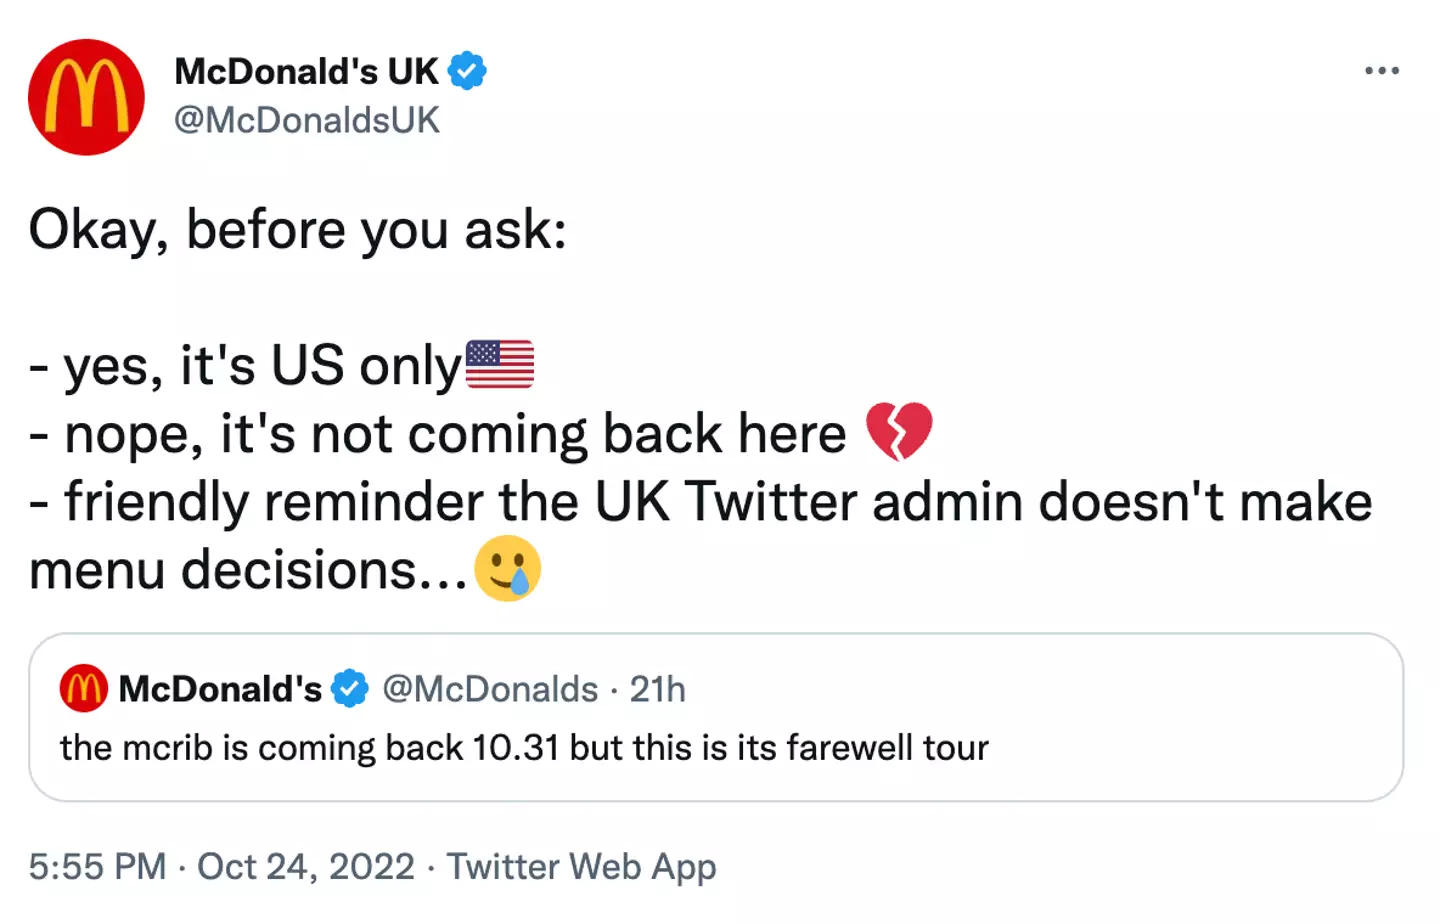 McDonald's reminded fans that the McRib will only be available in the US.